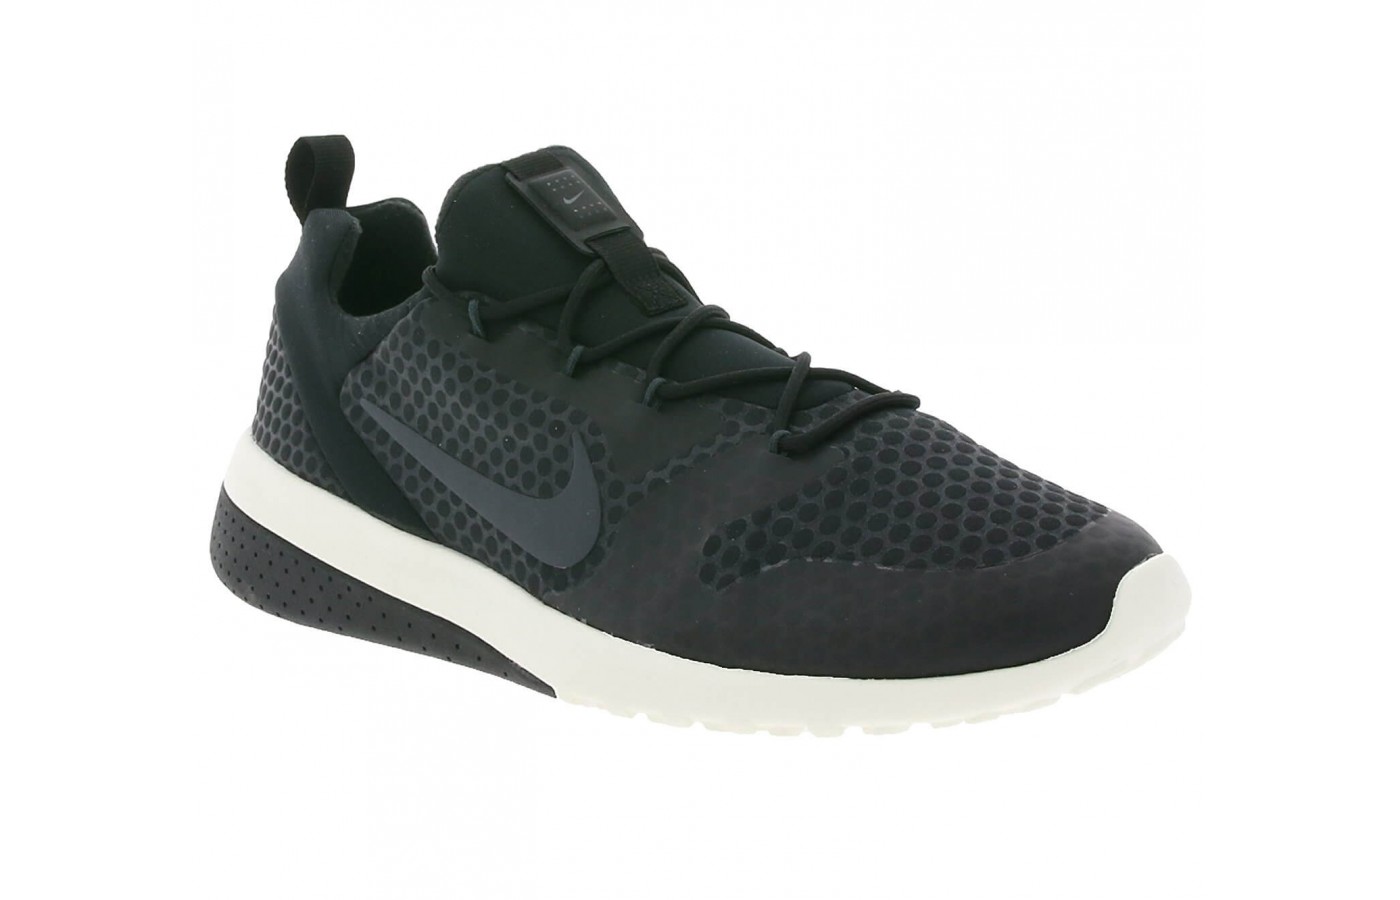 The Nike CK Racer is a new twist on traditional designs from the legendary footwear designer.